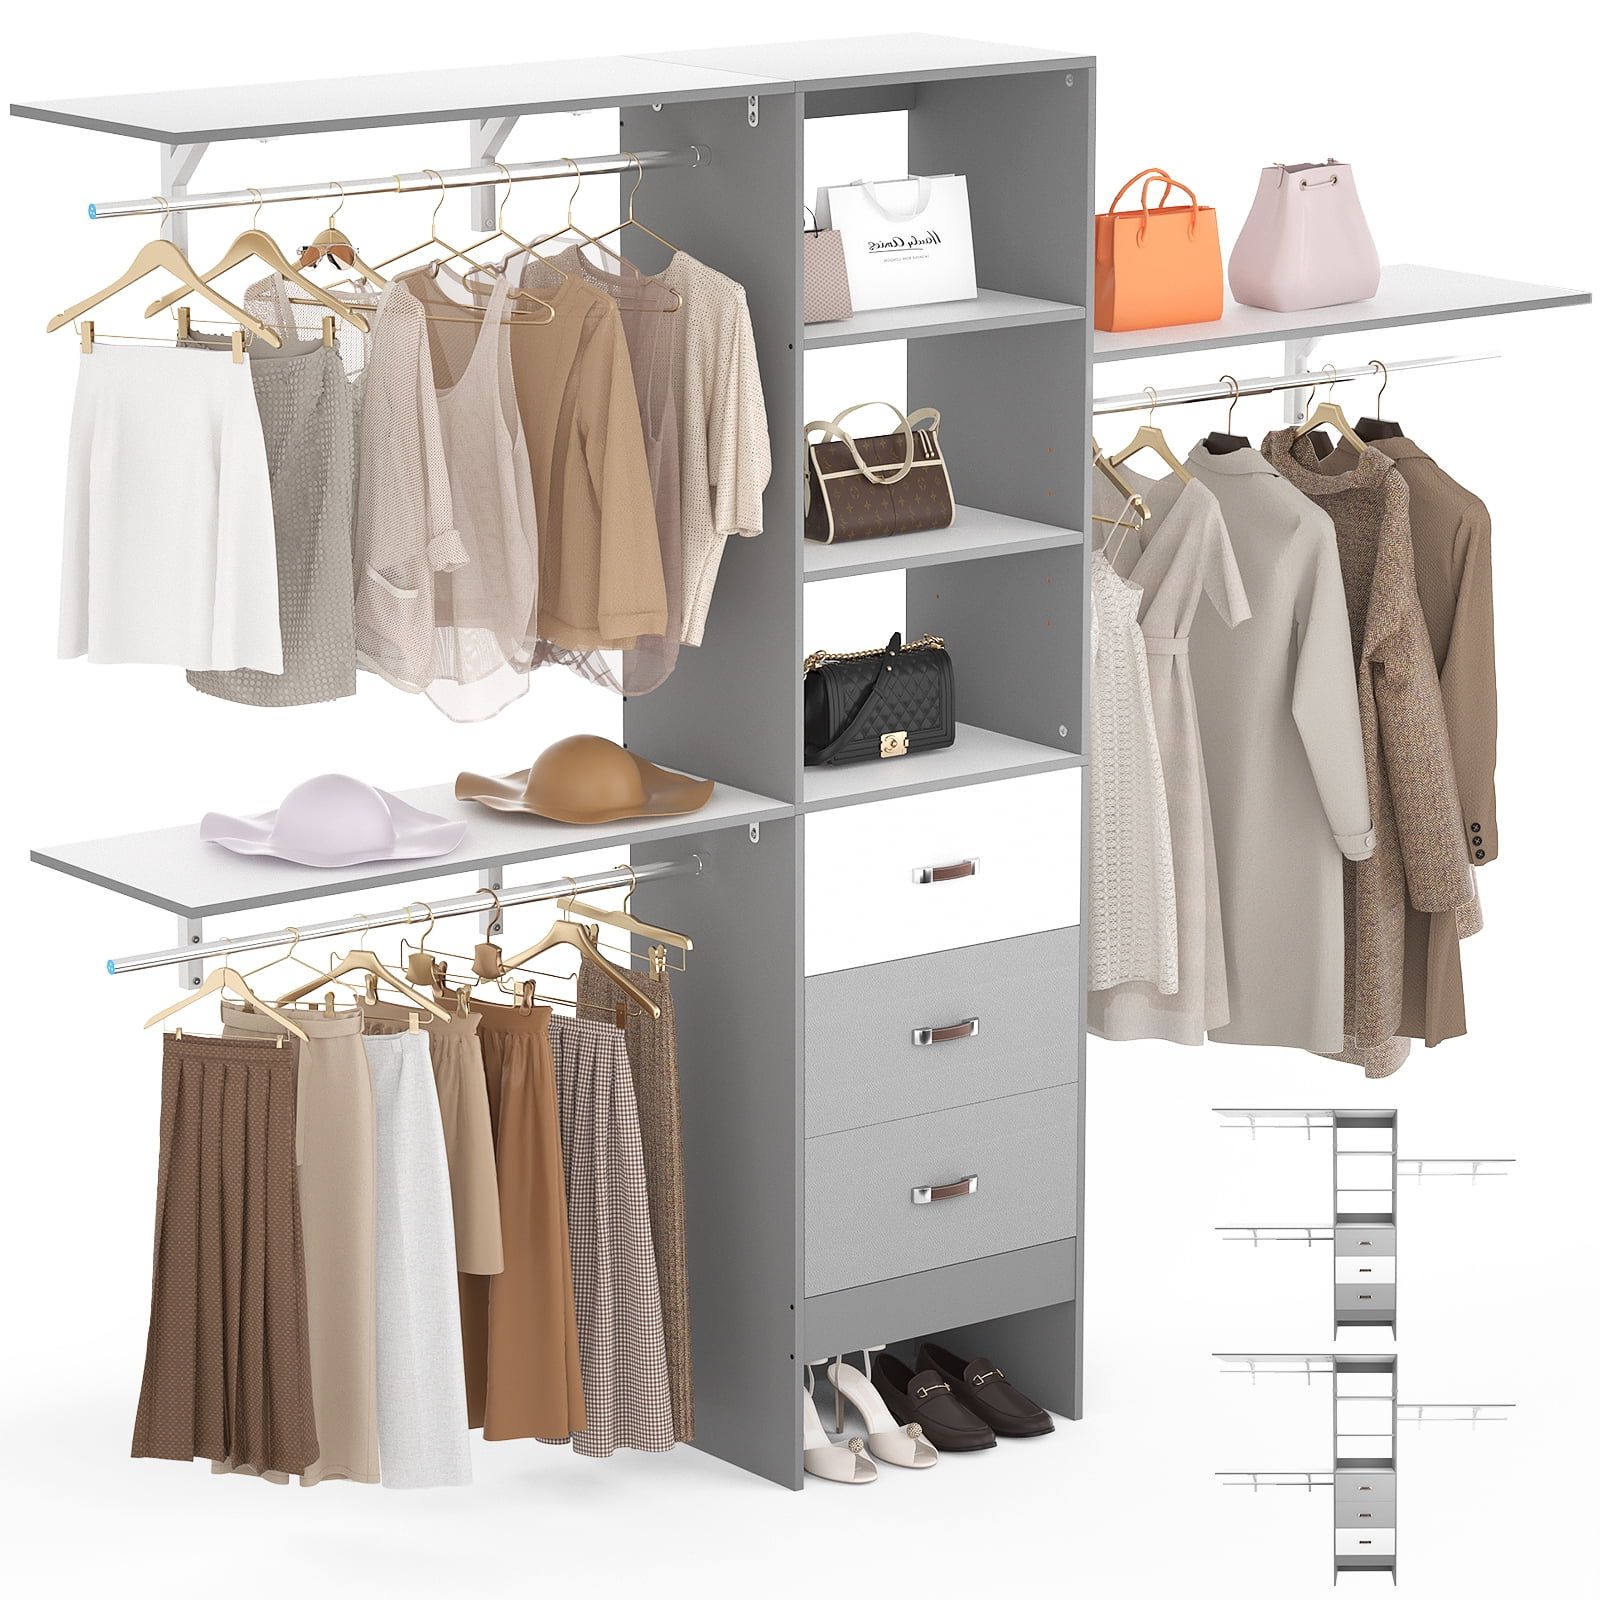 96 Inches Wardrobes With Favorite Homieasy 96 Inches Closet System, 8ft Walk In Closet Organizer With 3  Shelving Towers, Heavy Duty Clothes Rack With 3 Drawers, Built In Garment  Rack, 96" L X 16" W X 75" H, (View 4 of 10)